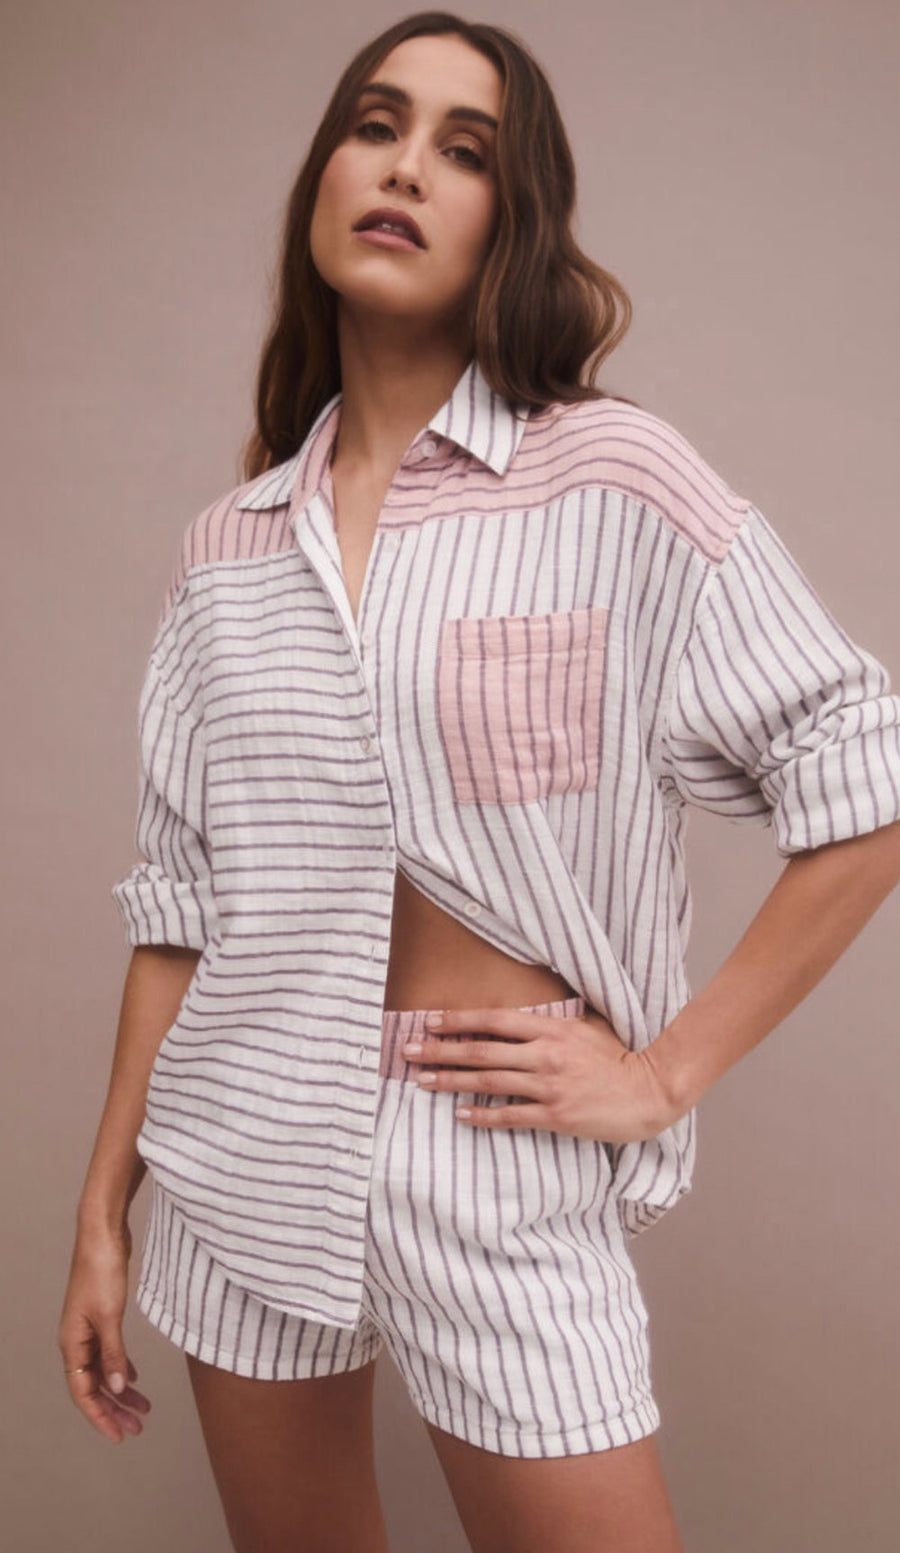 Long sleeve button down top with stripes in the color bone. 